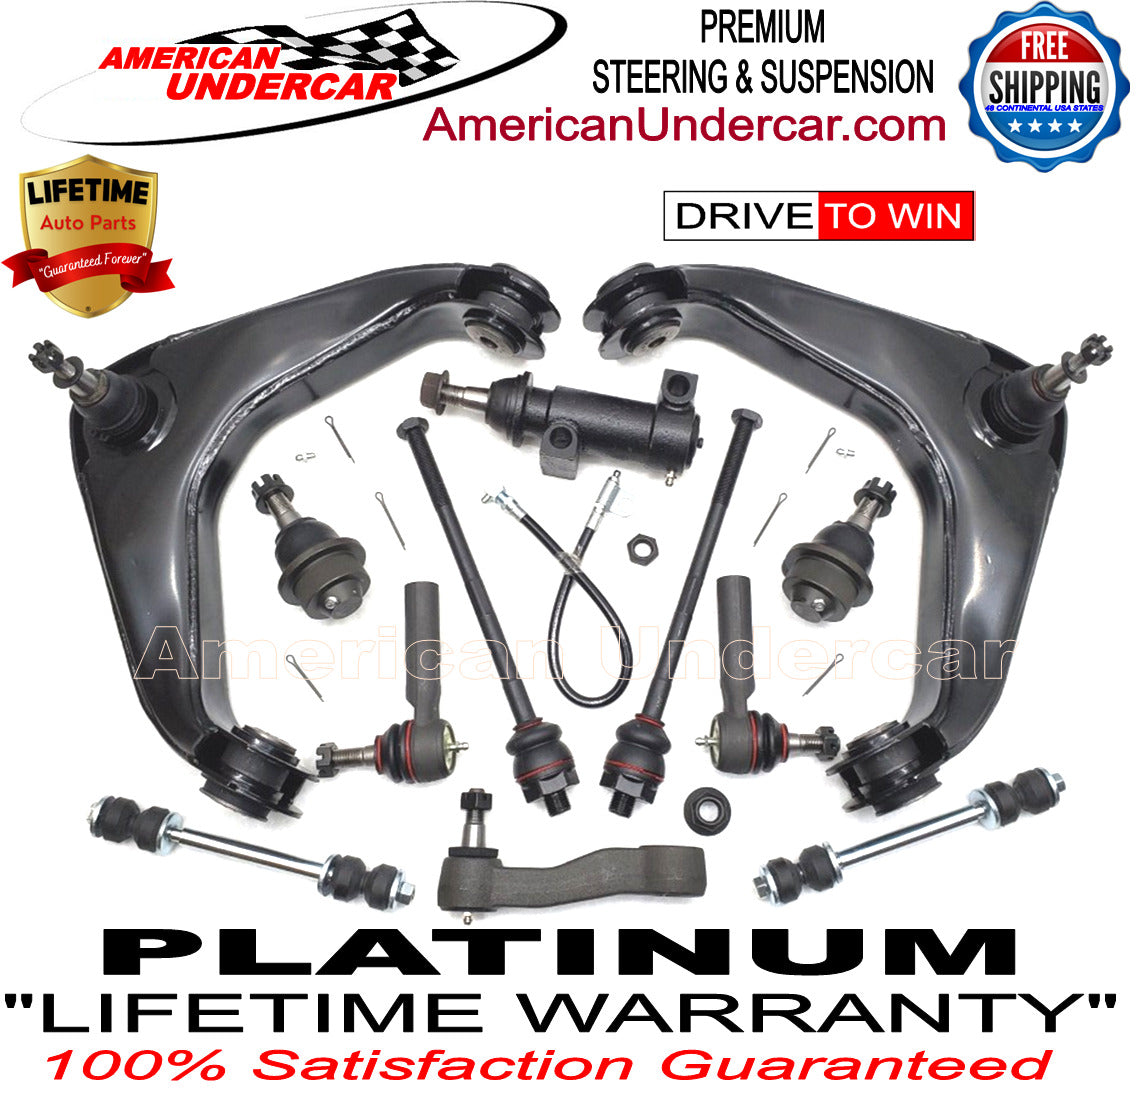 Lifetime Steering and Suspension Kit for 2001-2010 GMC Sierra 2500HD 2WD